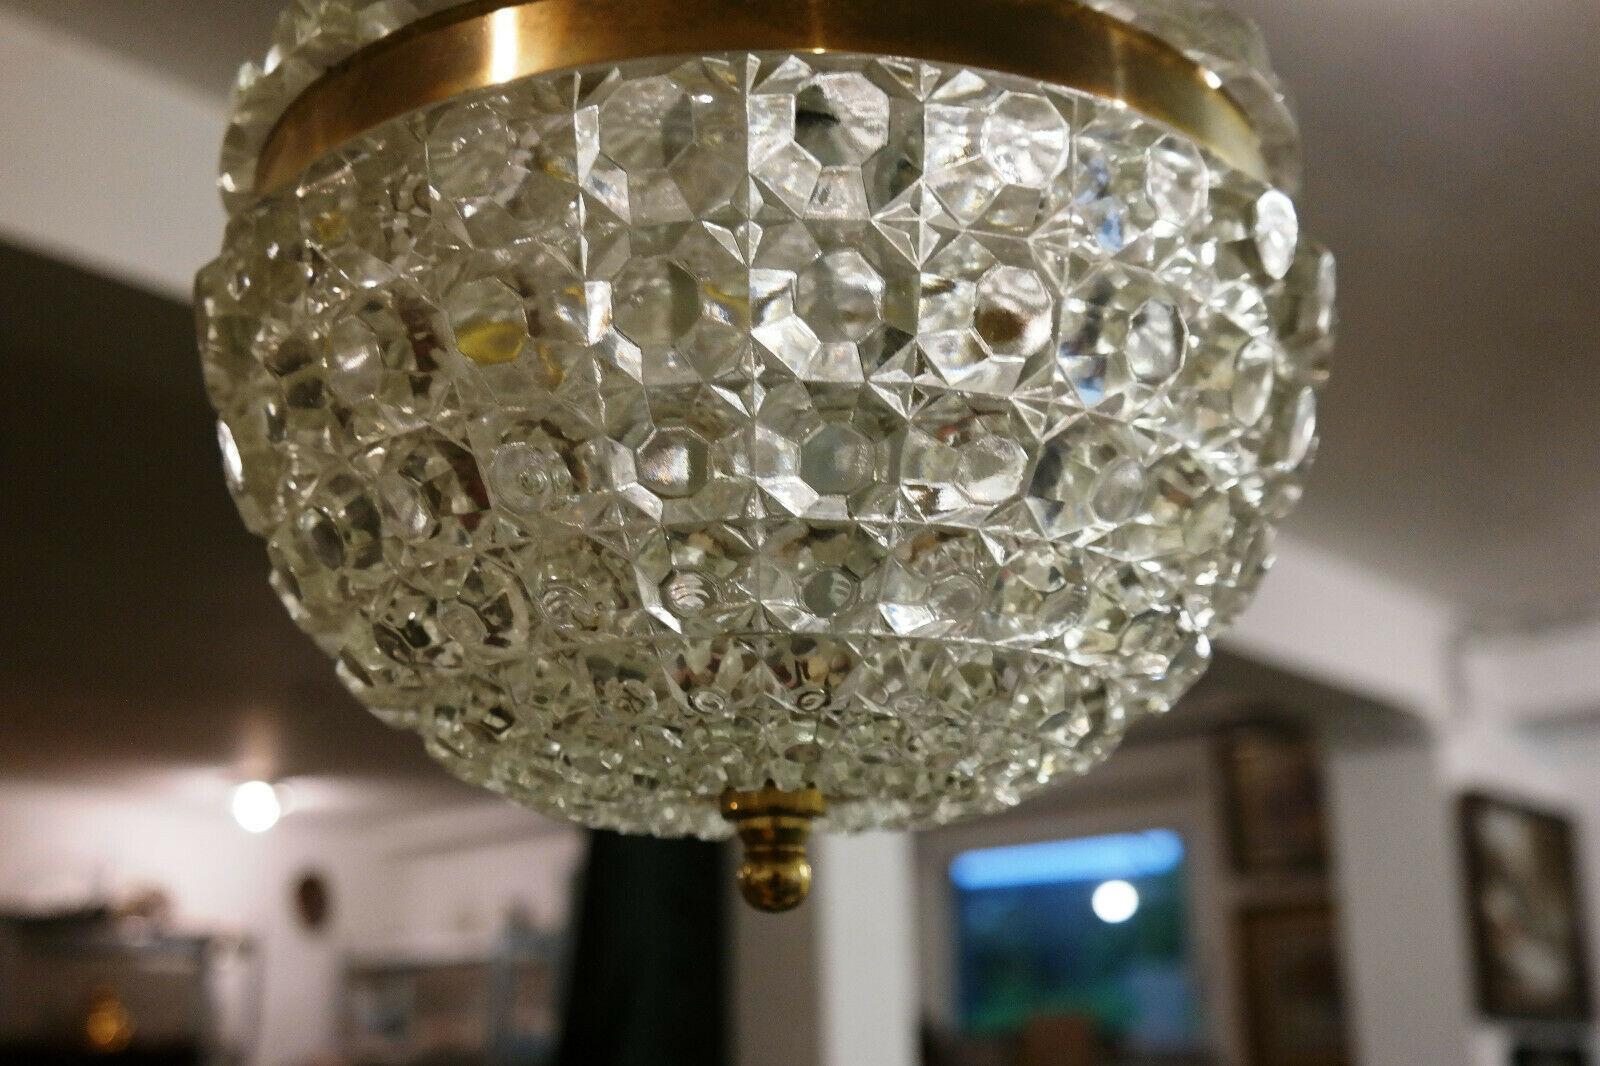 1950's French Mid Century Modern Formed Glass Bag and Tent Chandelier - Baccarat im Zustand „Gut“ im Angebot in Opa Locka, FL